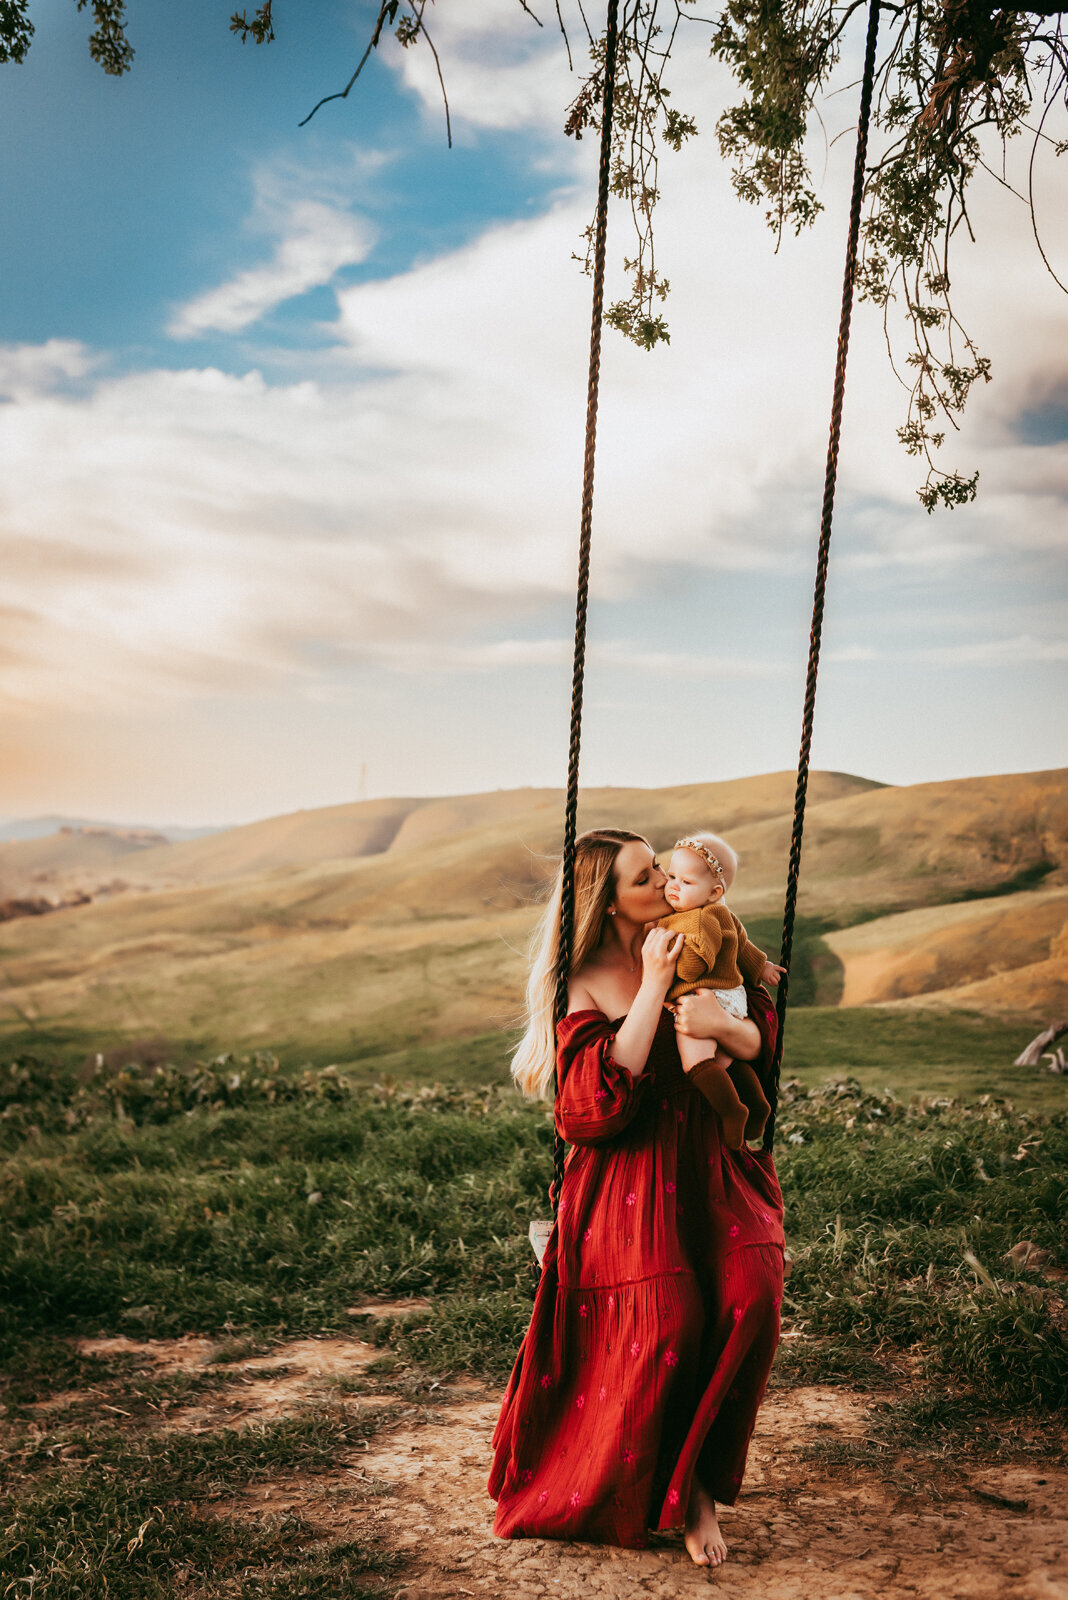 Mama kissing daughter while on a swing in the East Bay Hills